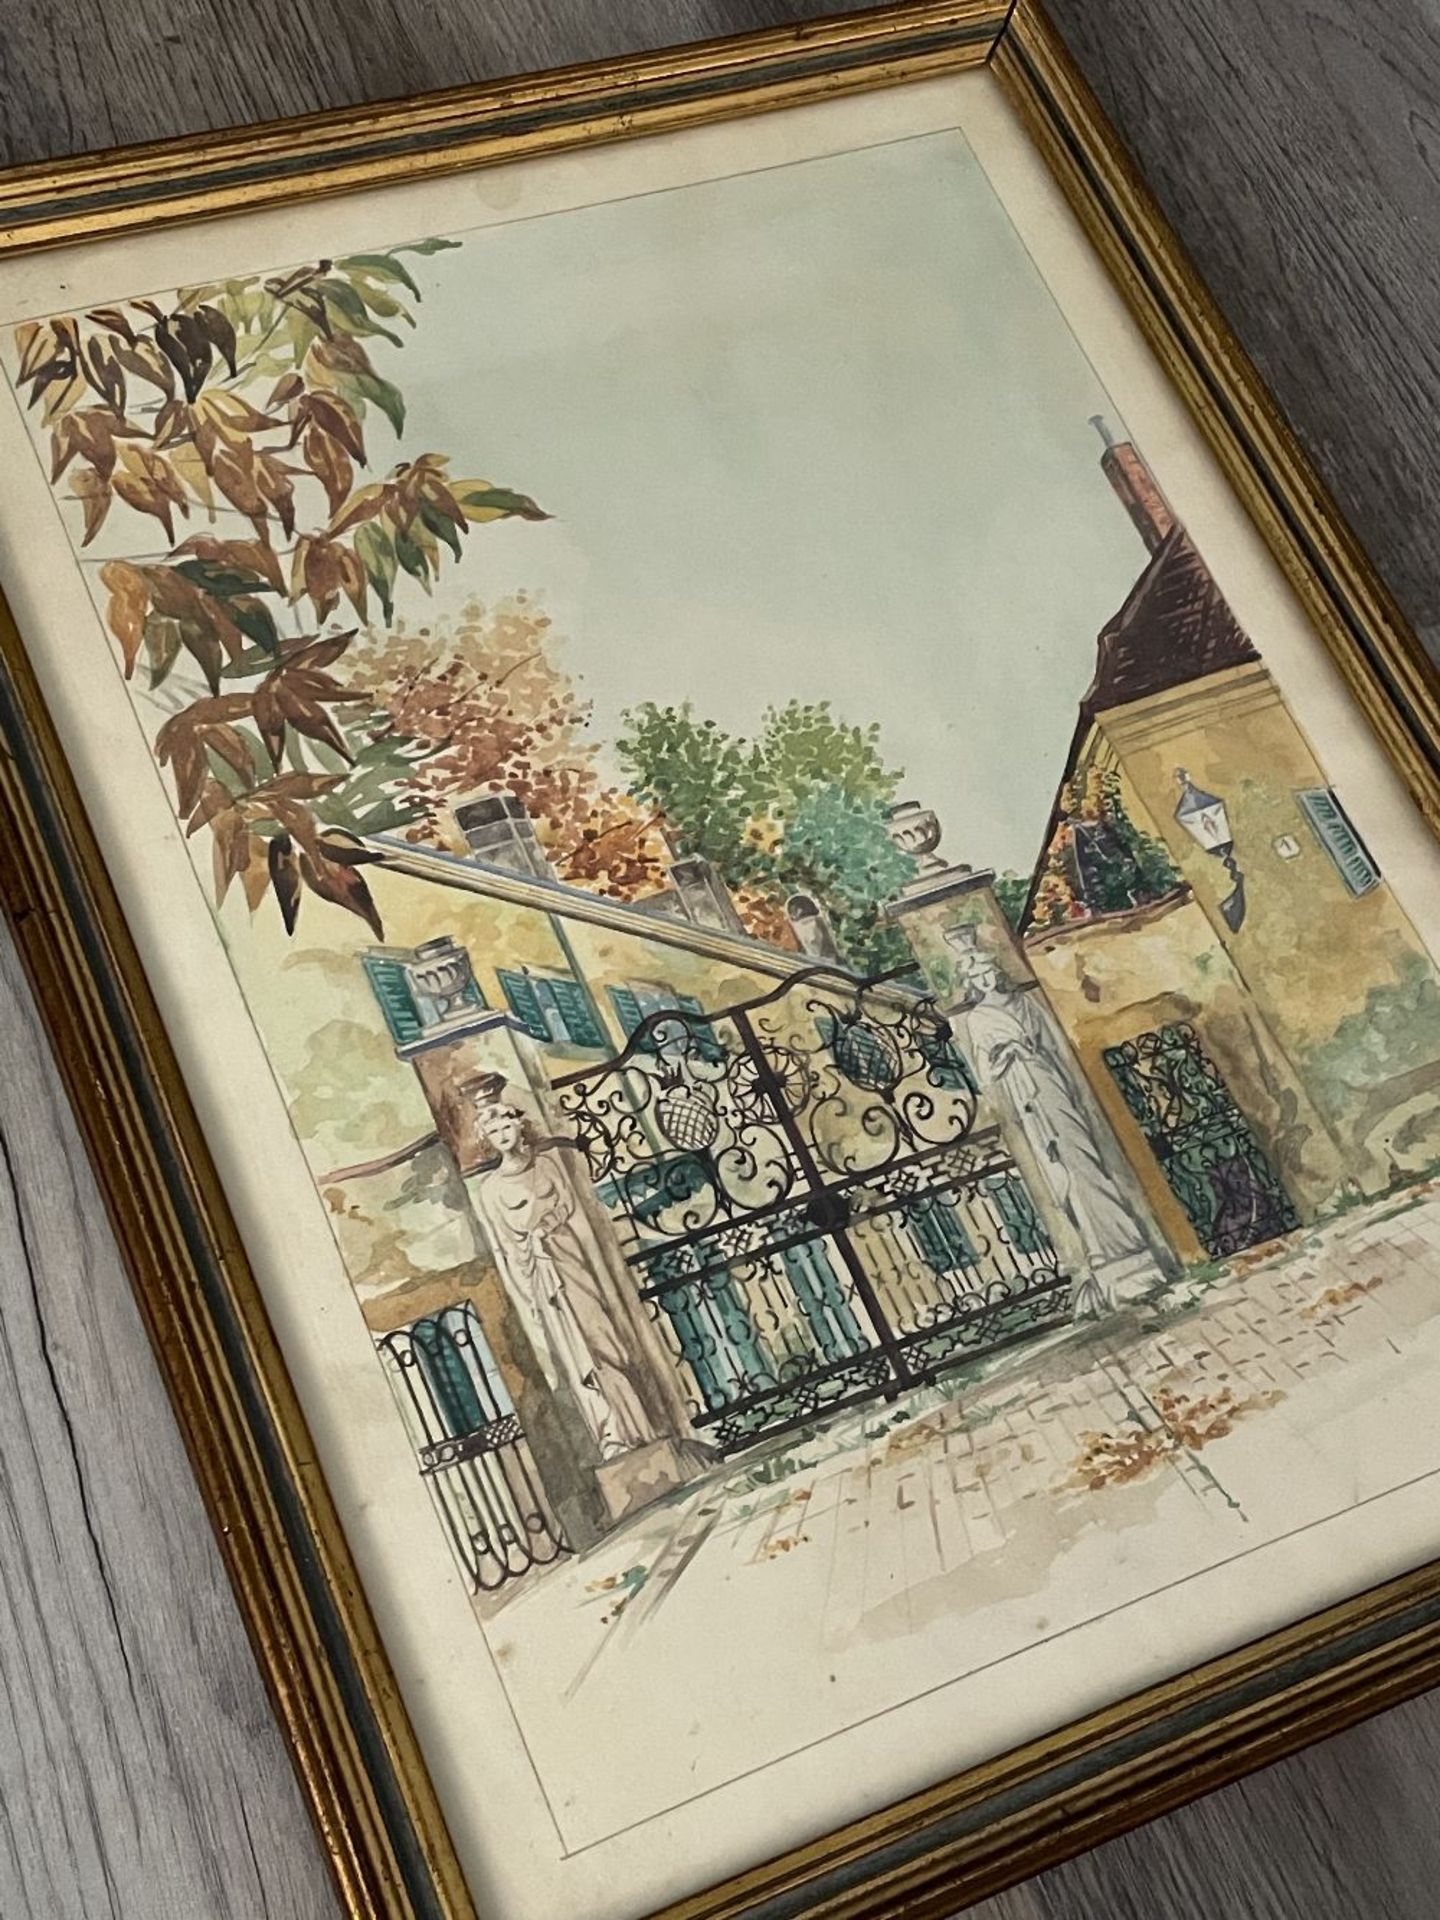 Framed watercolor art (Print or original?), brought over from WW2 Europe, 20x12" - Image 2 of 5